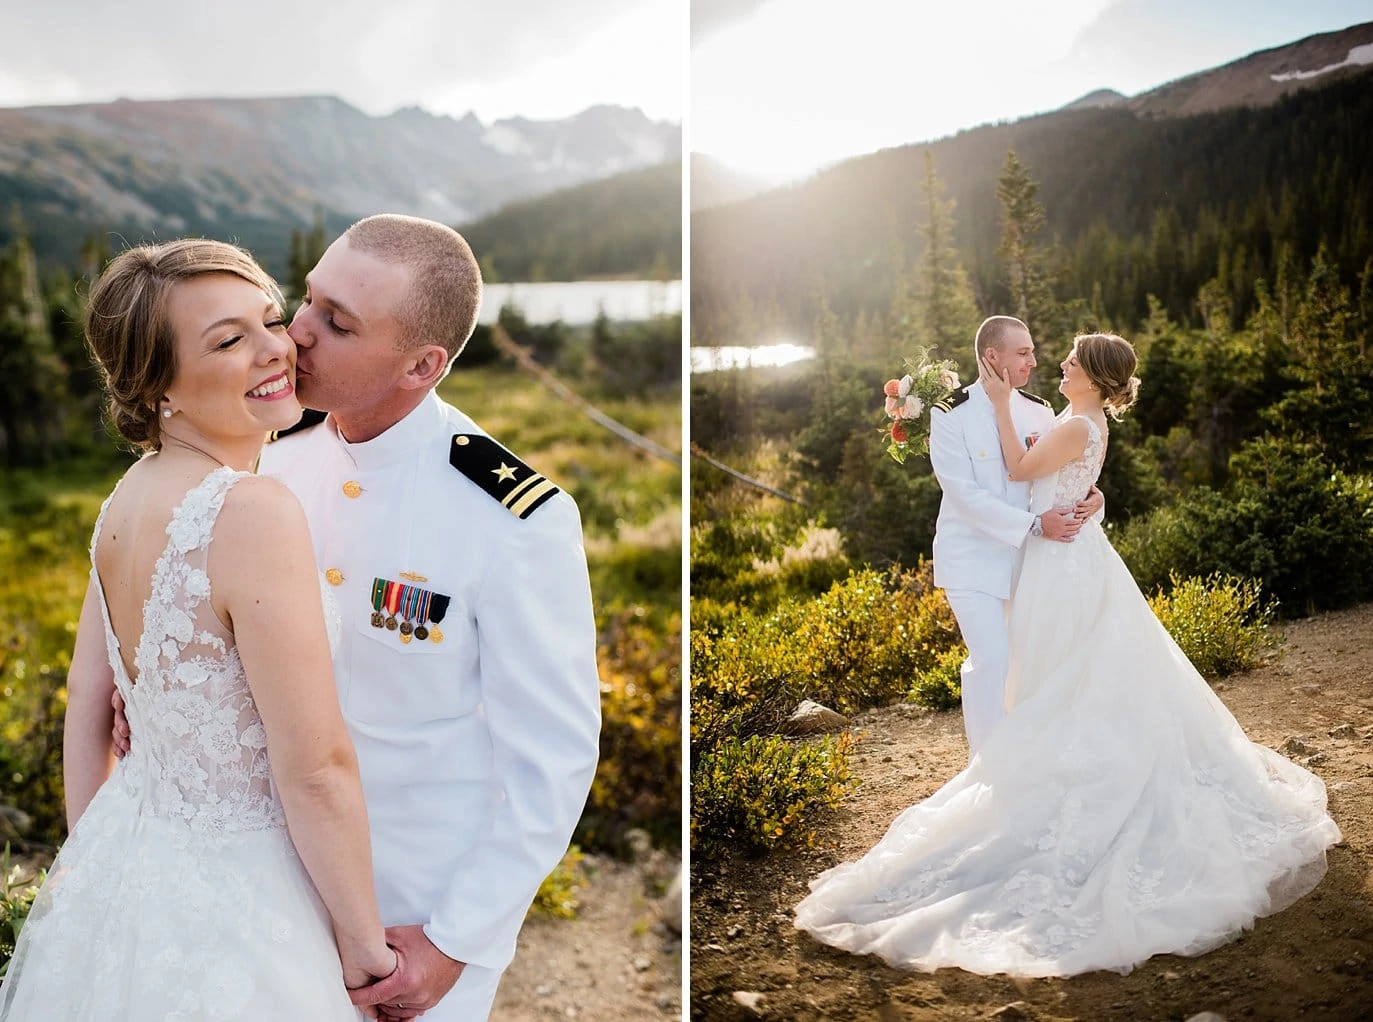 Romantic Long Lake Elopement with bride in lace ballgown and groom in military dress